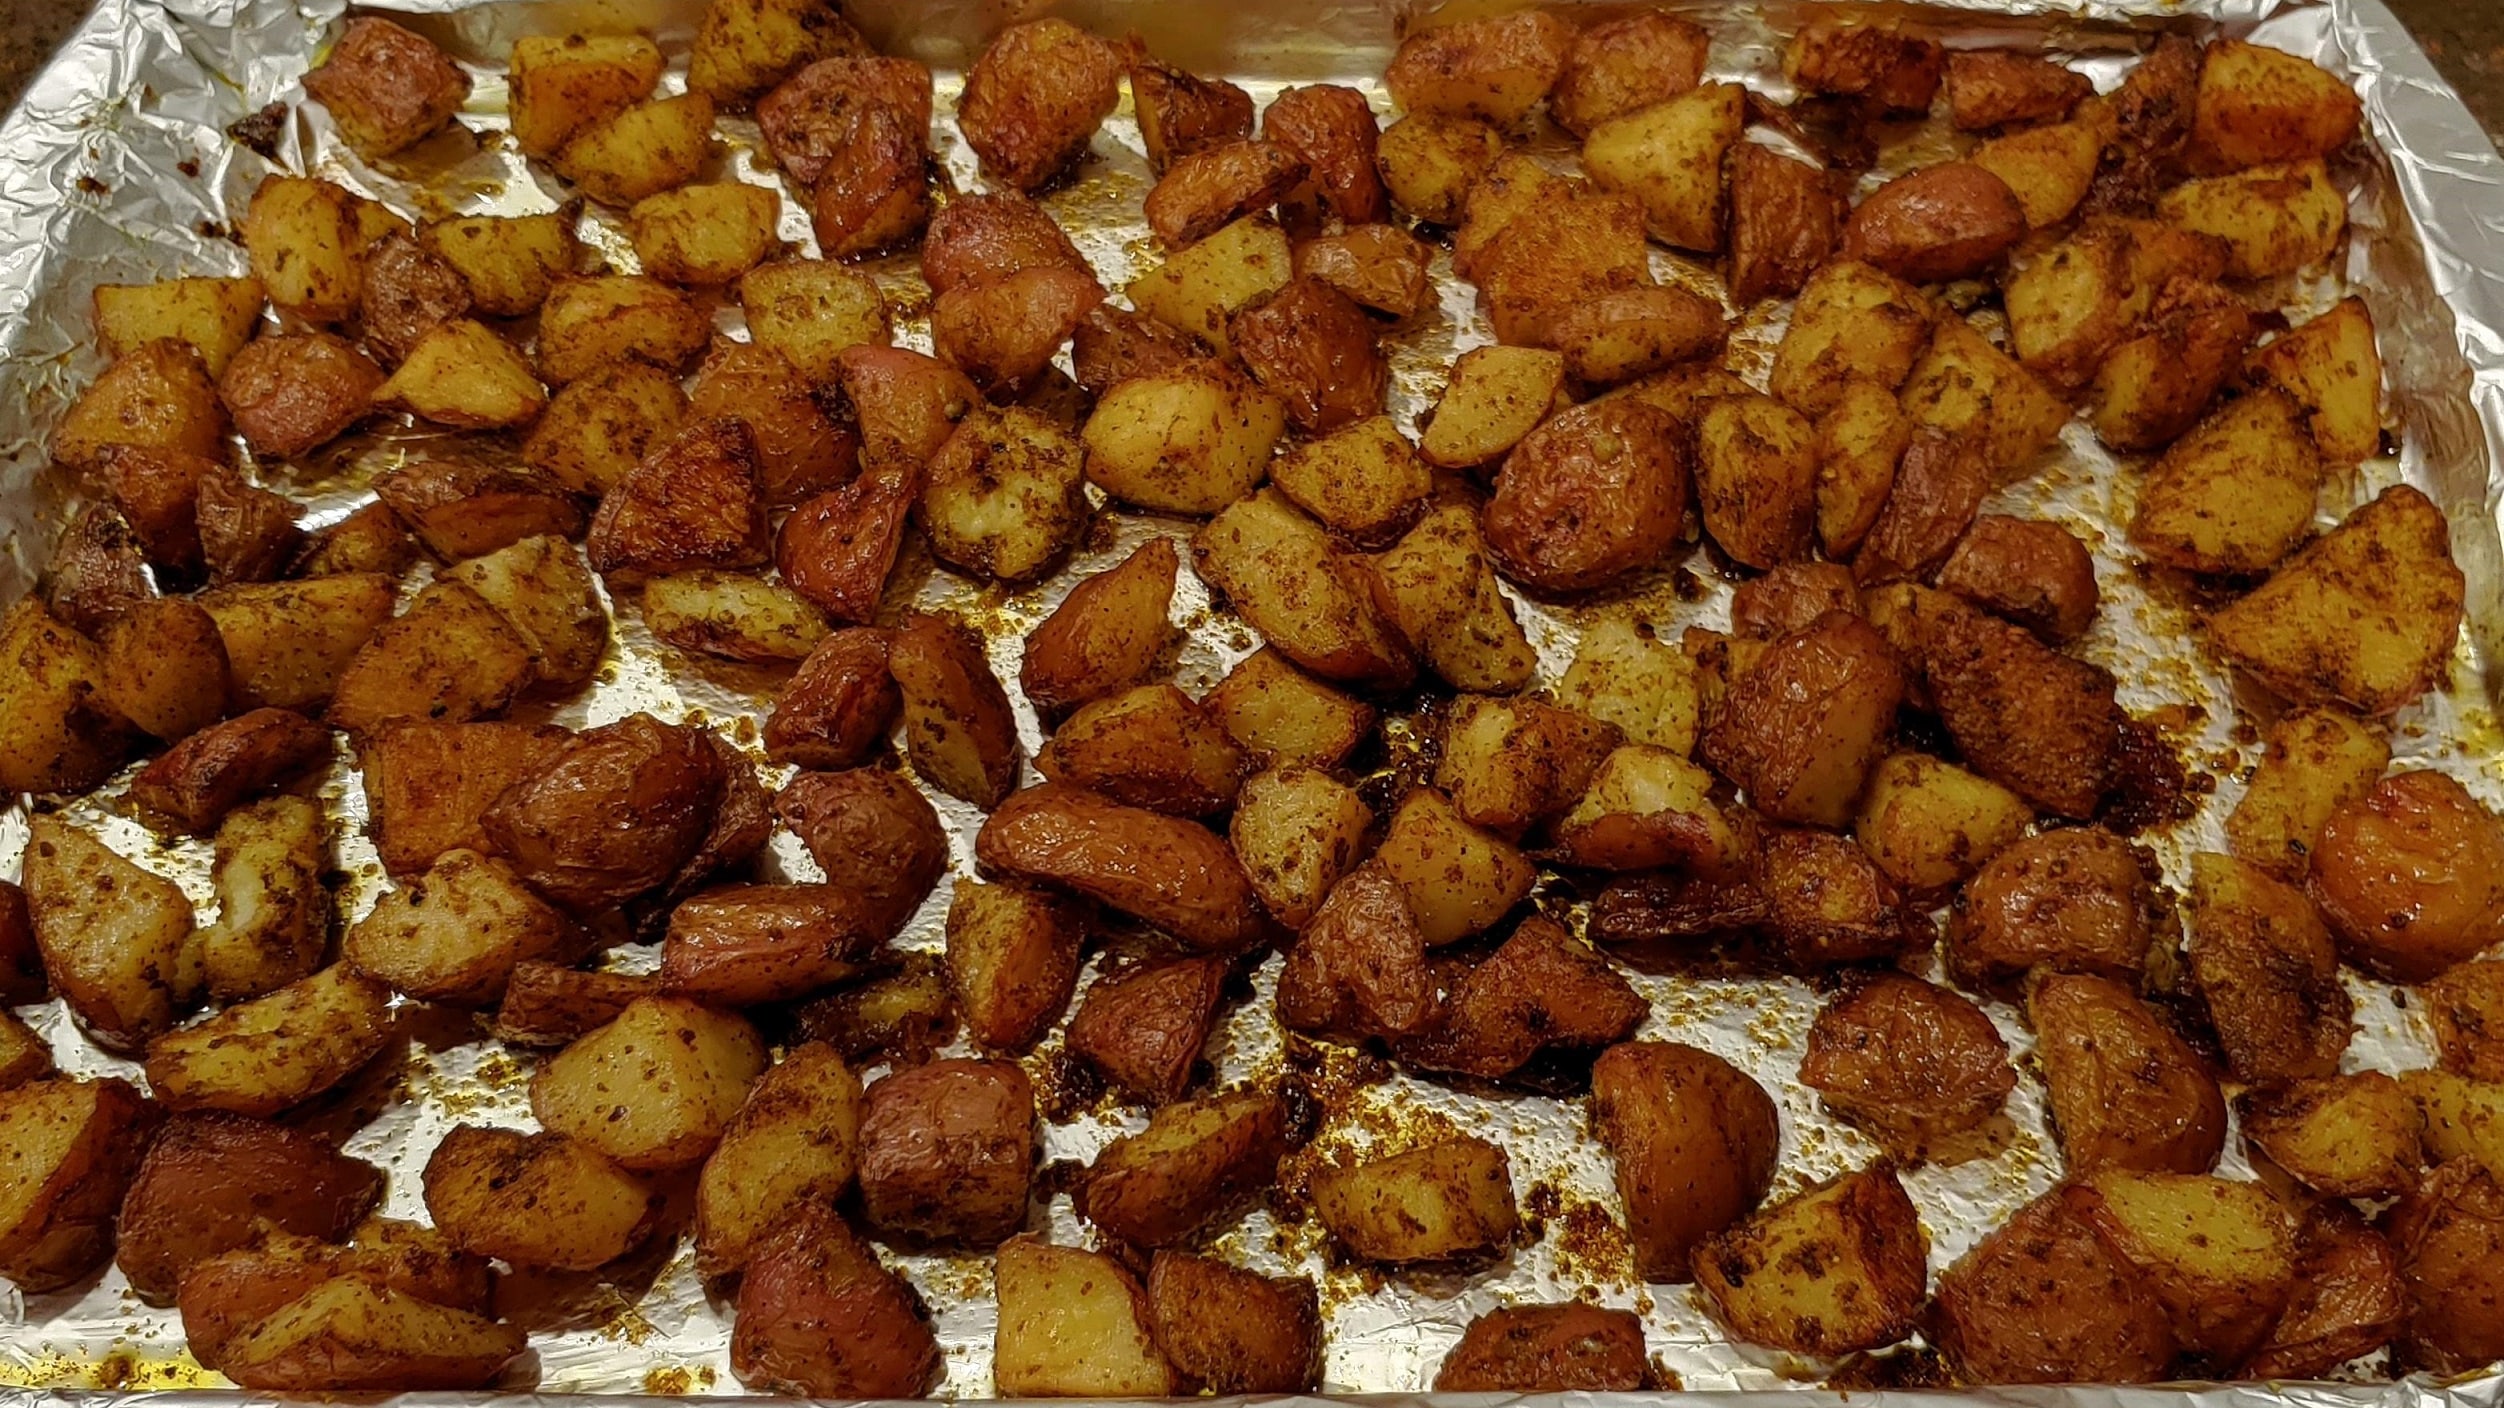 Fried Potatoes - Dining in with Danielle